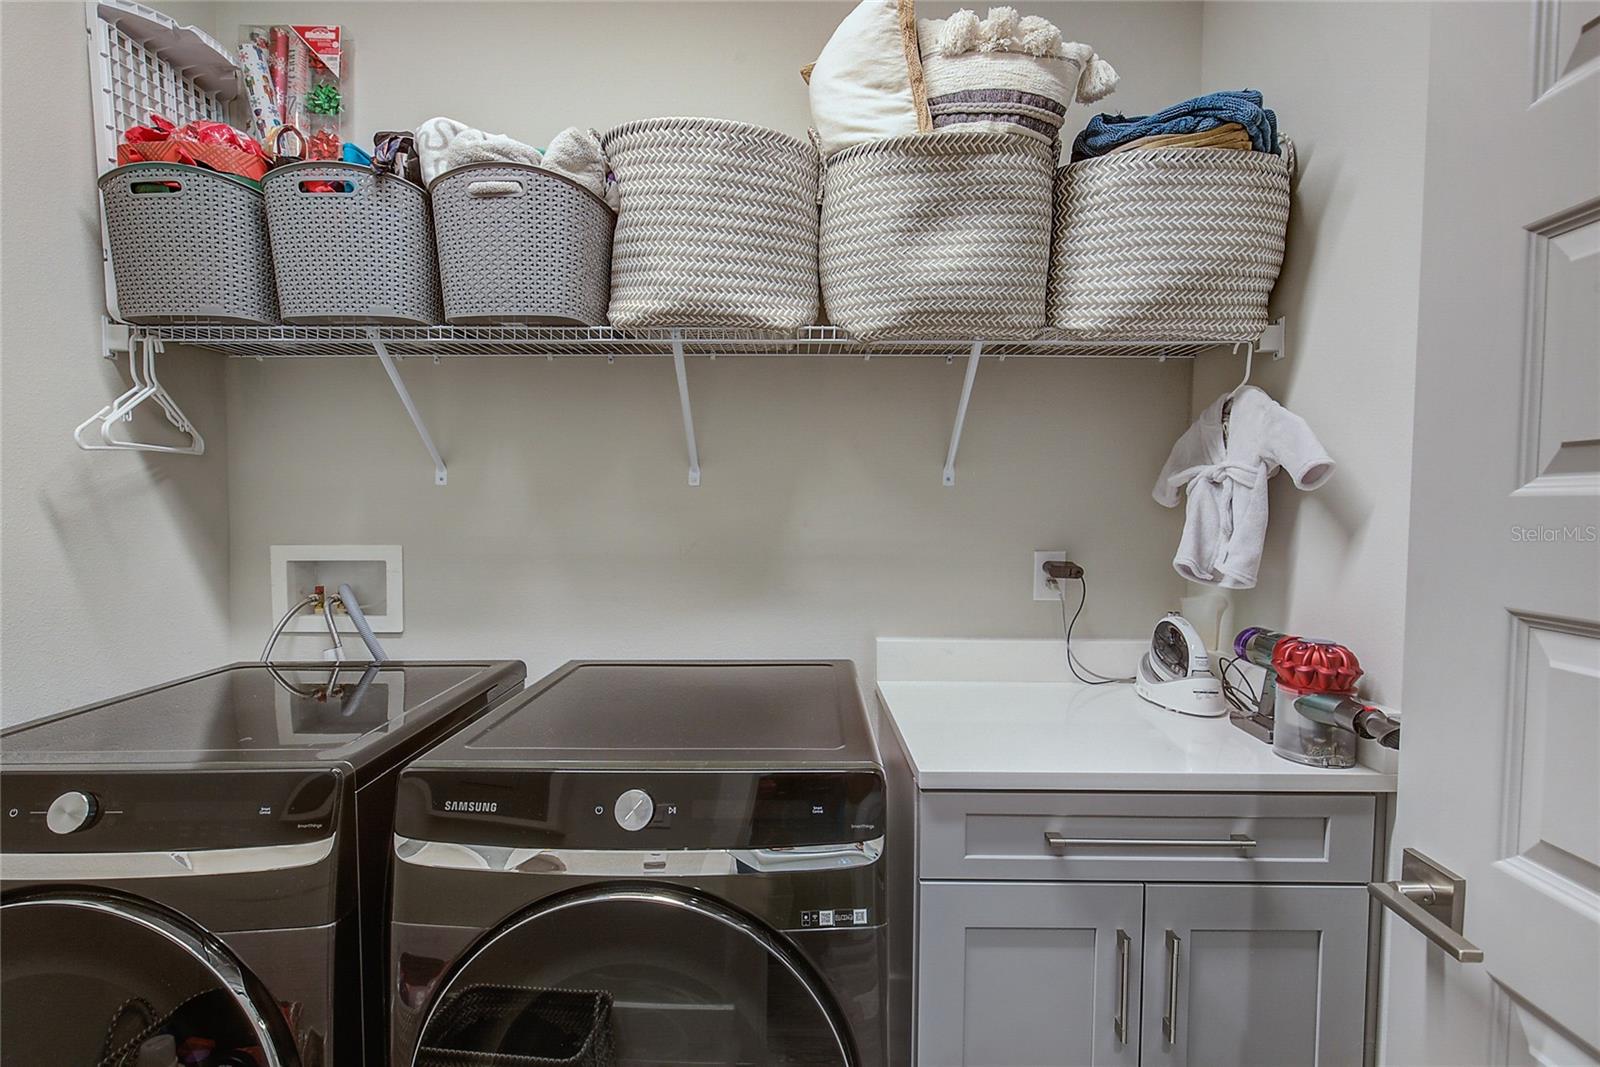 ROOMY LAUNDRY ROOM OFF THE KITCHEN FOR CONVENIENCE